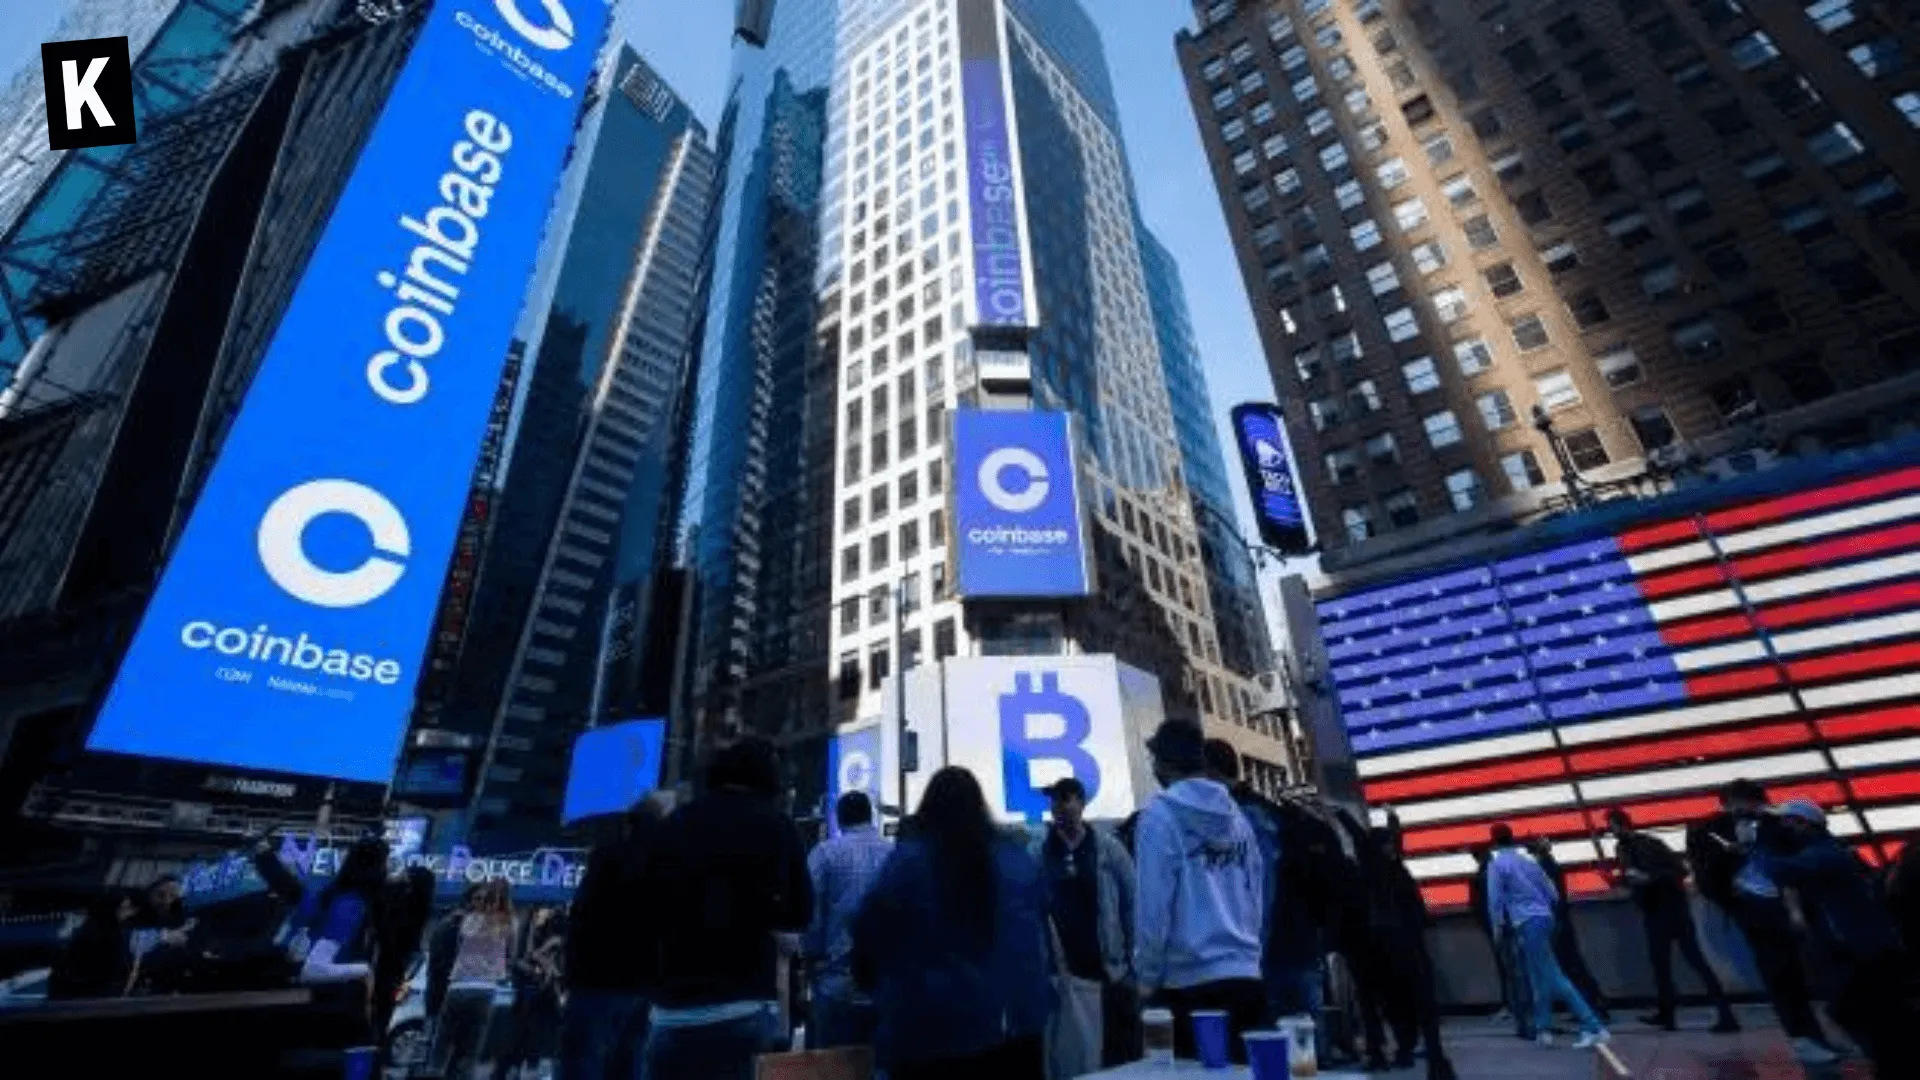 Coinbase marketing on New York displays in Manhattan during the IPO